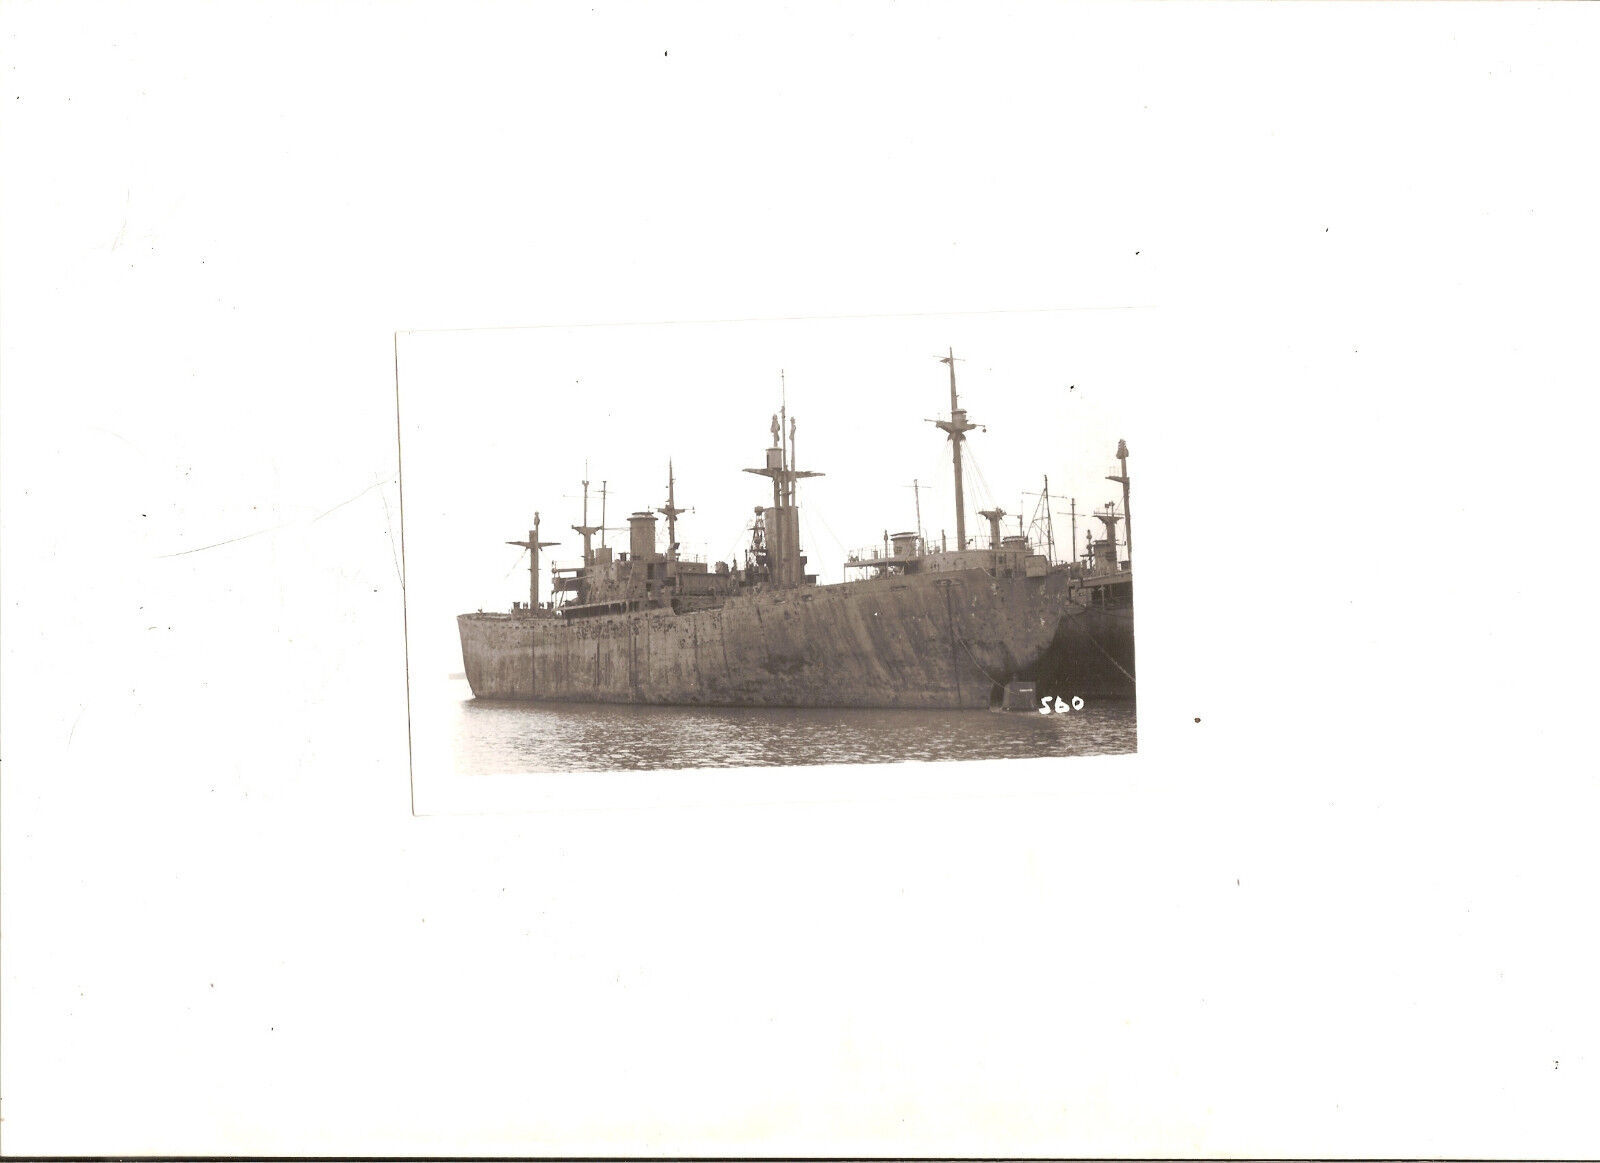 Primary image for Vintage Black & White Photograph Rusty Ship 560